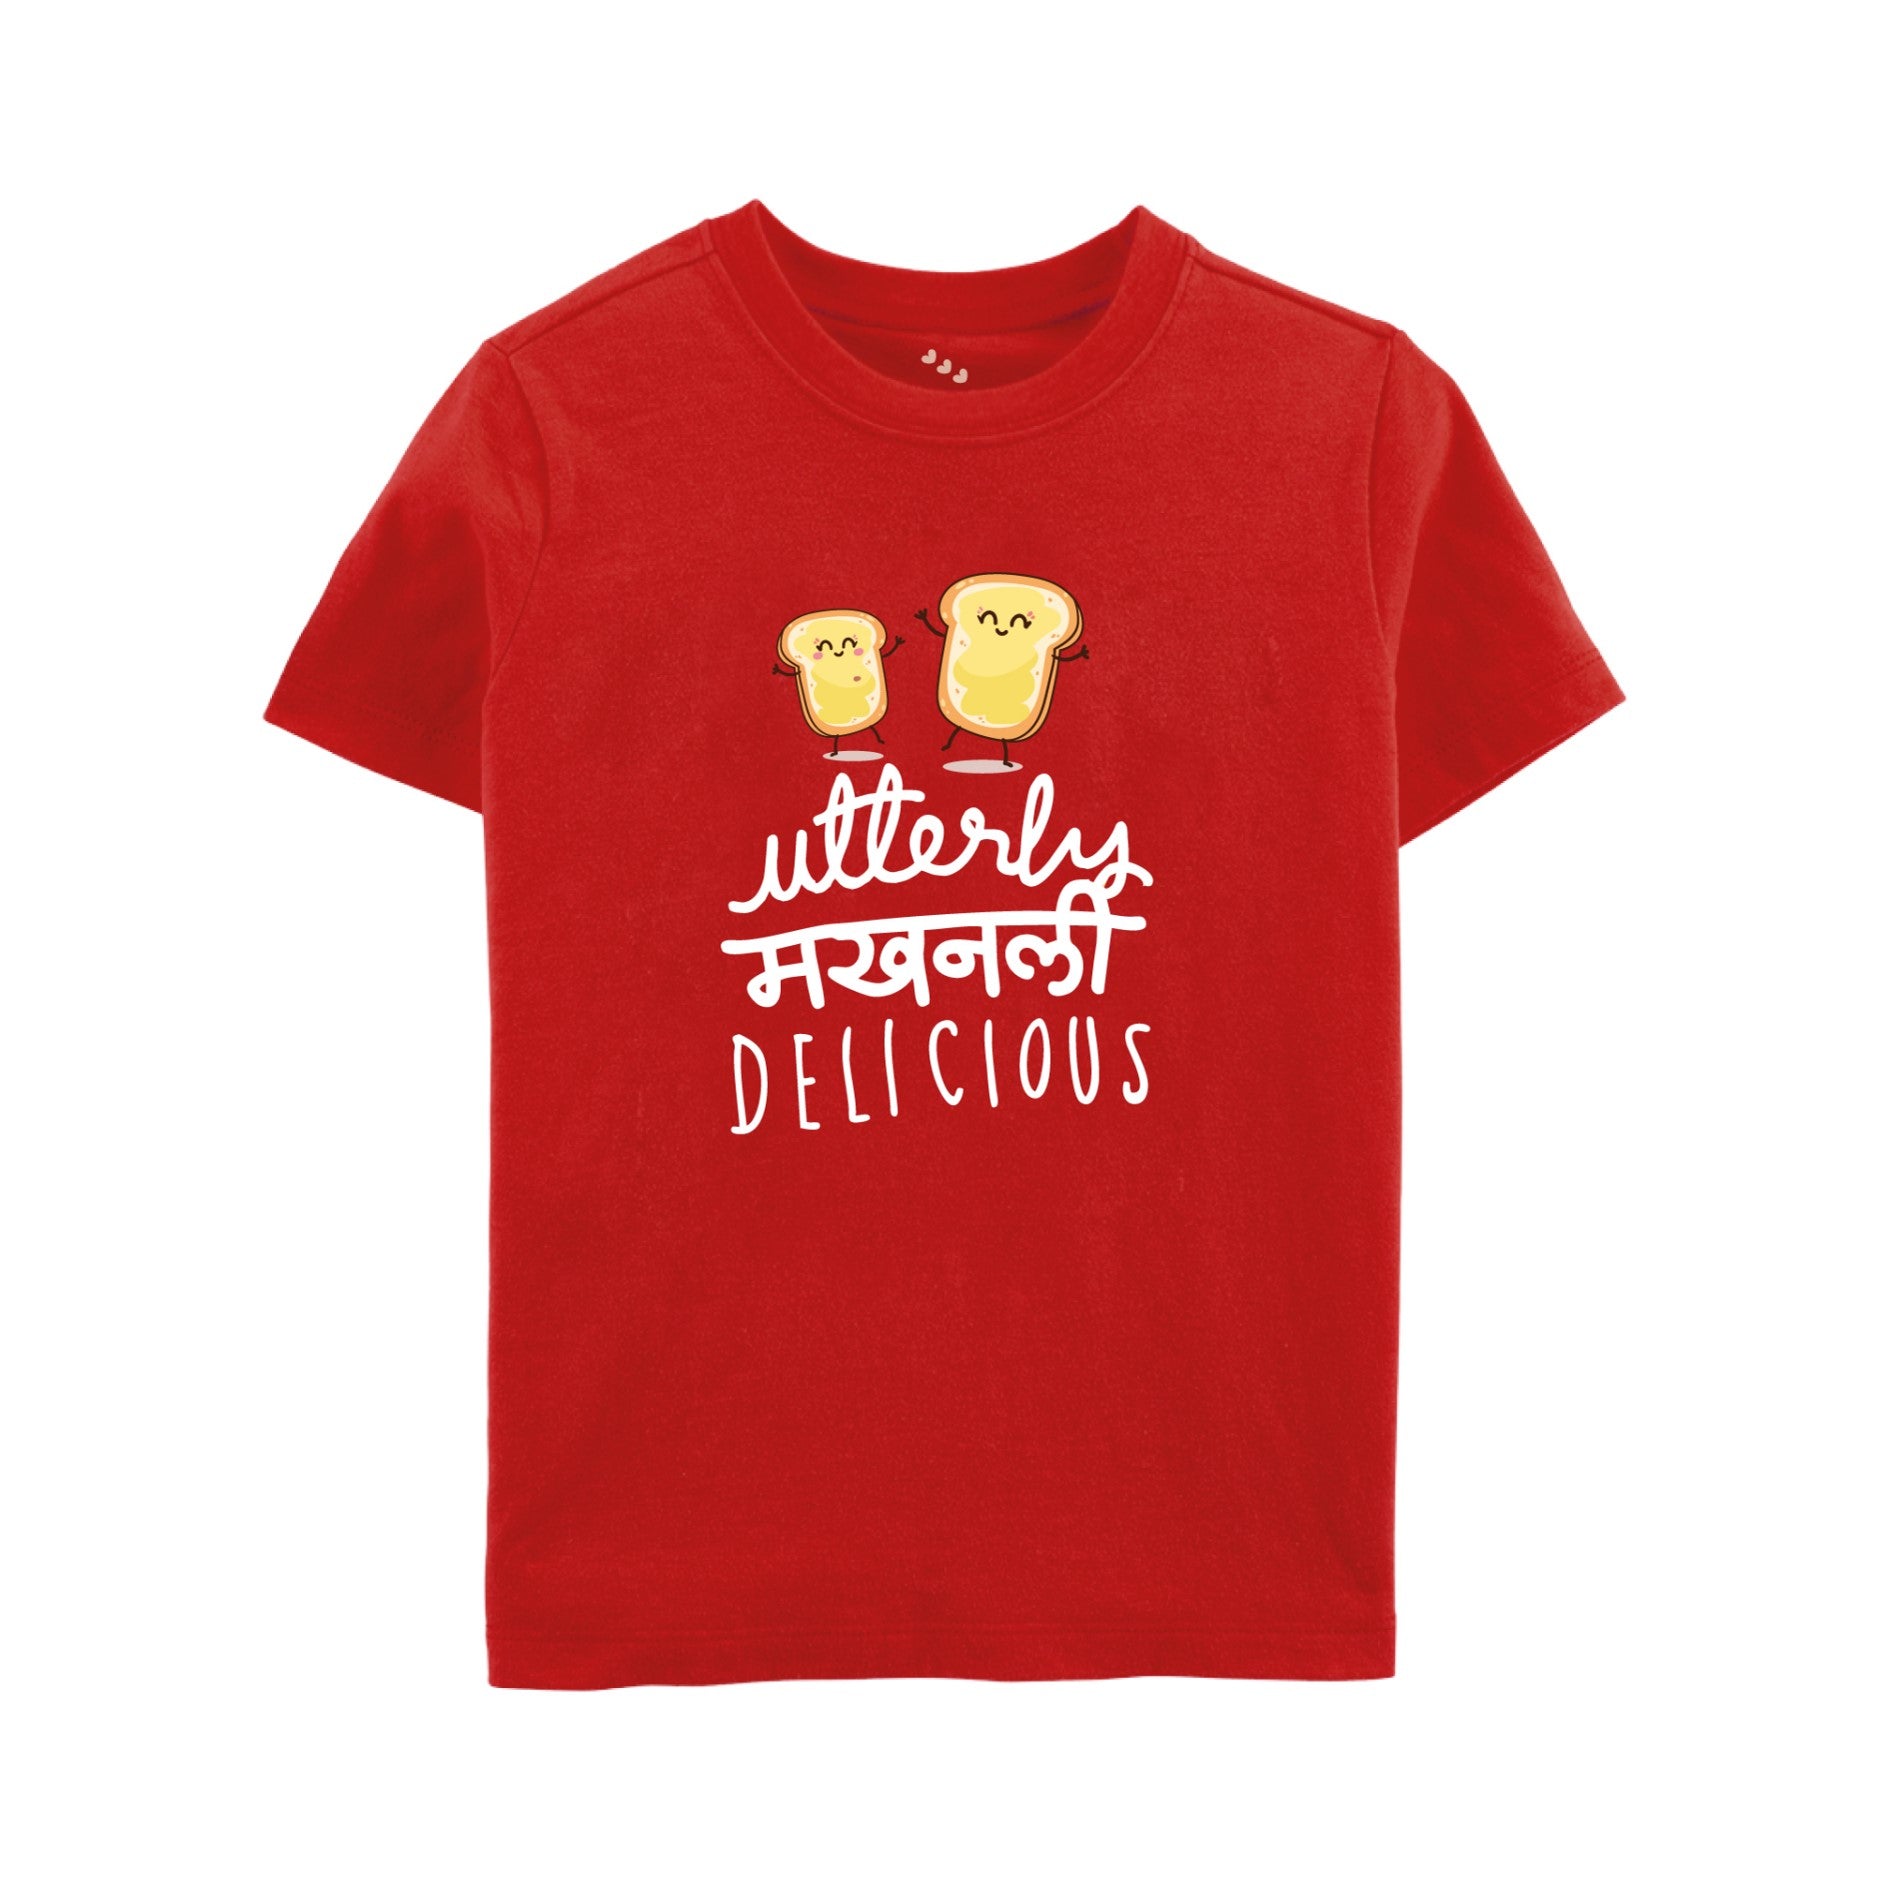 Utterly Makhanly Delicious - Red